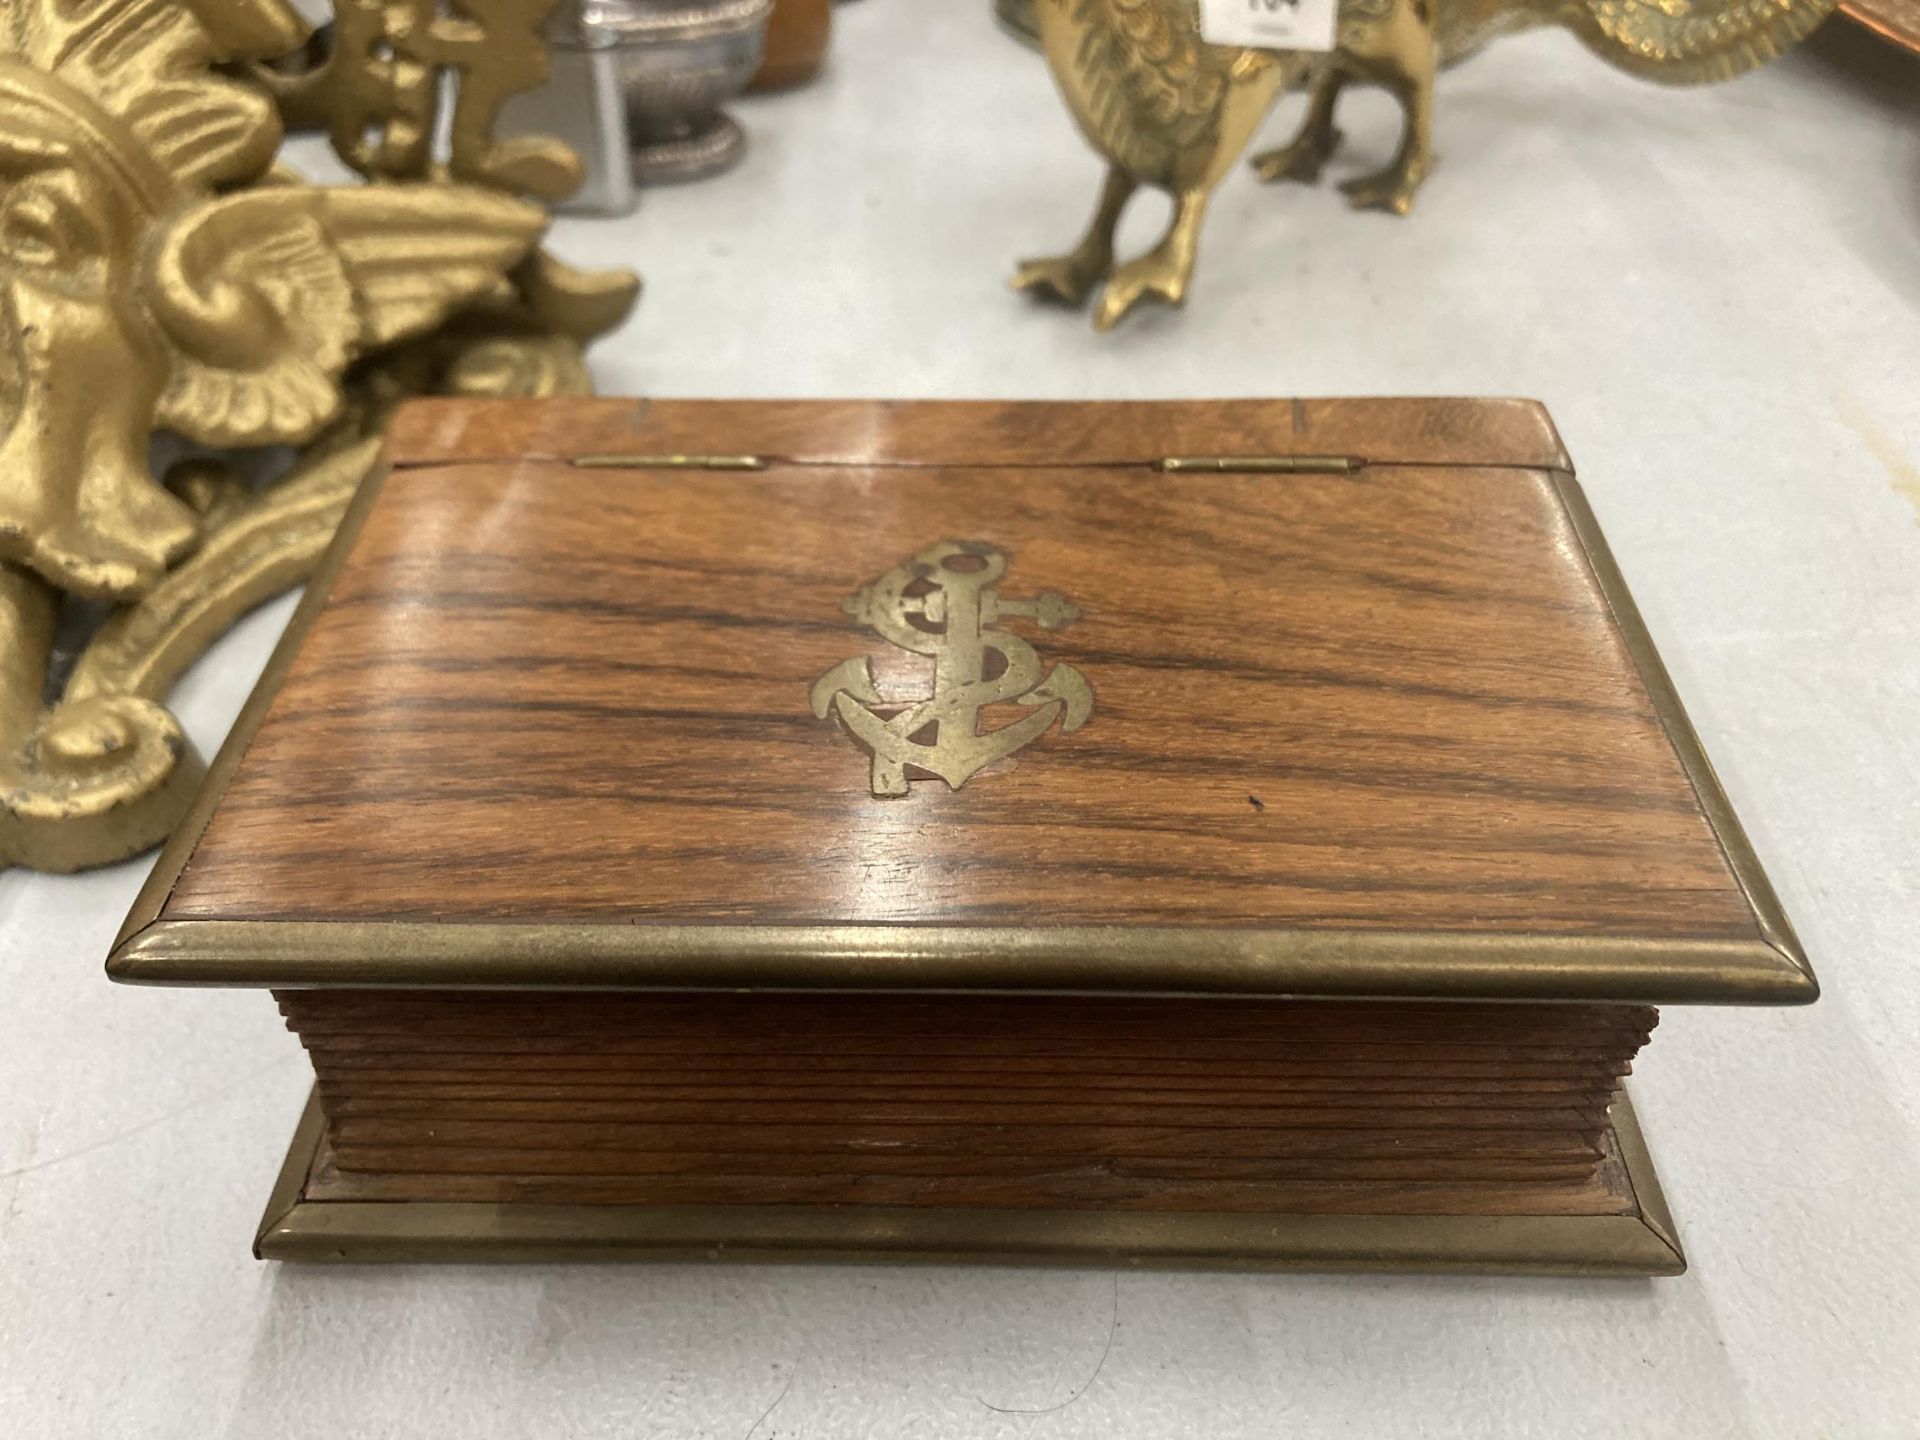 A MAHOGANY BOX IN THE SHAPE OF A BOOK WITH BRASS EDGES AND AN ANCHOR MOTIF TO THE LID